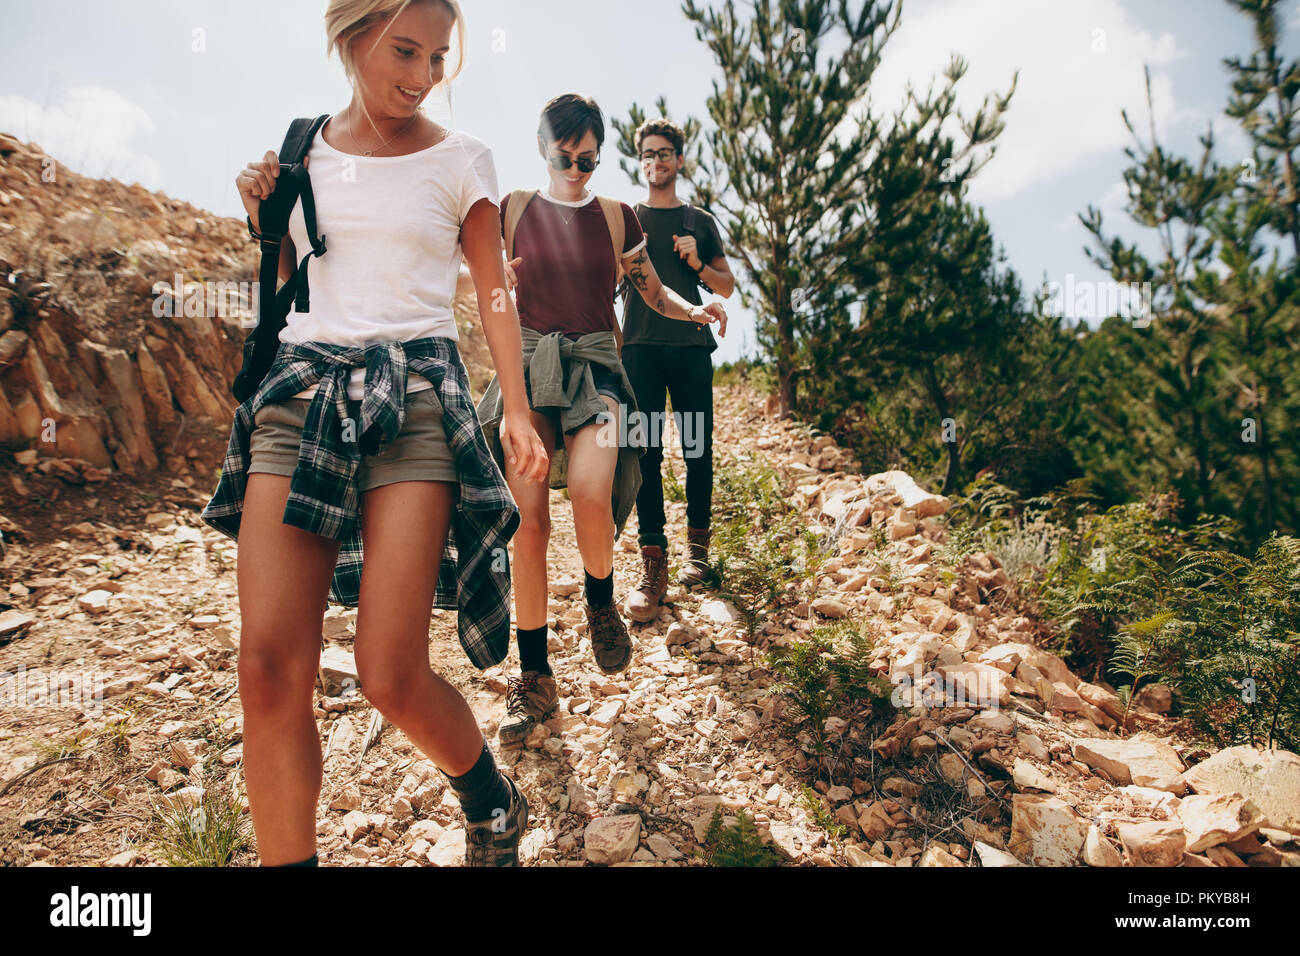 Friends hiking down a rugged hilly terrain. Man with two female friends walking on a rocky path in a country side location. Stock Photo